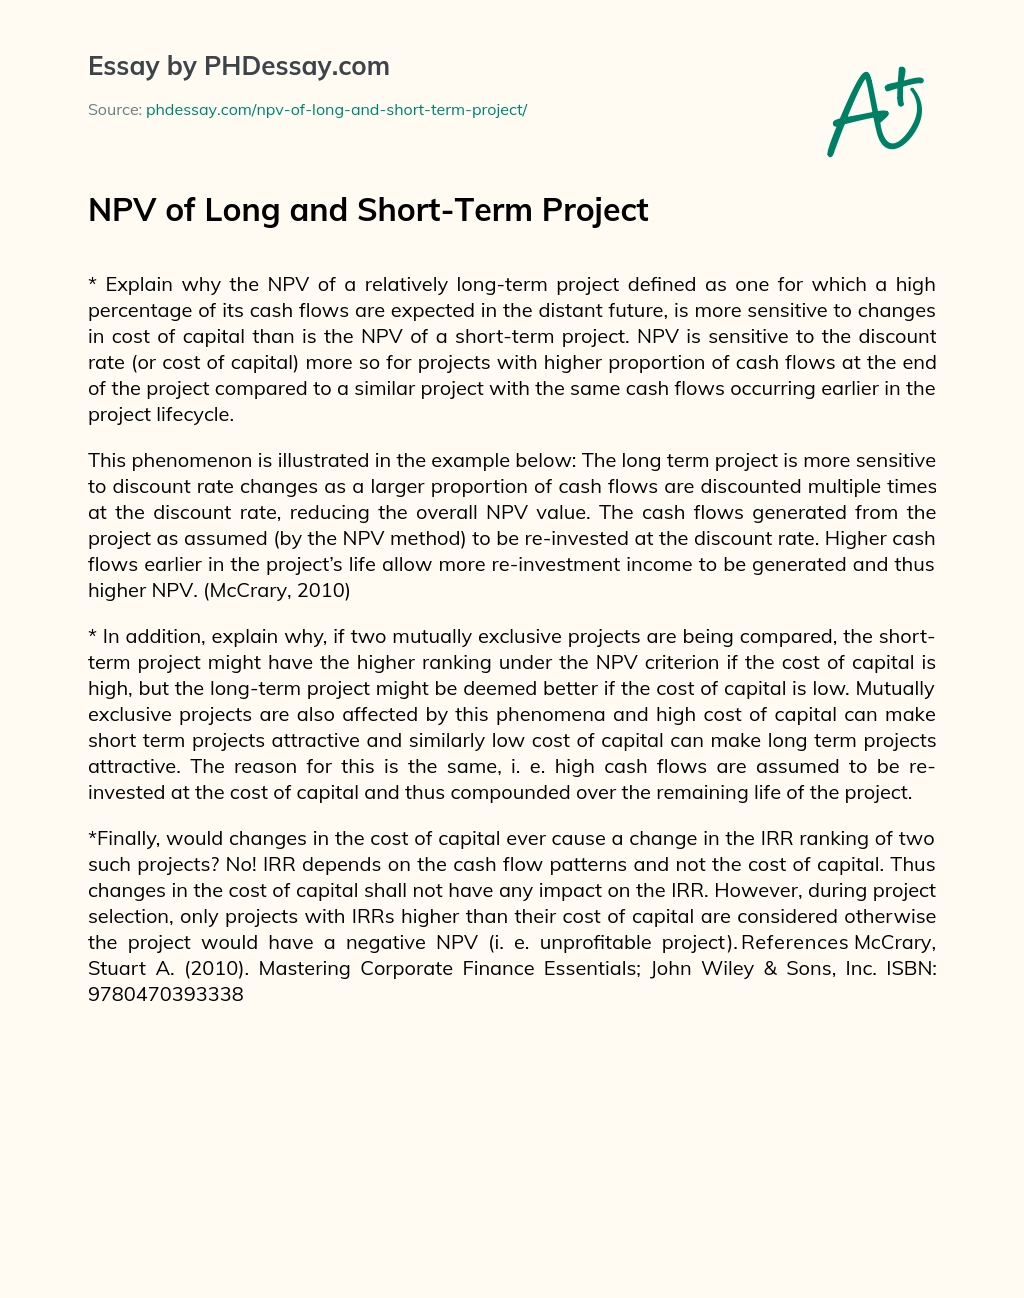 NPV of Long and Short-Term Project essay